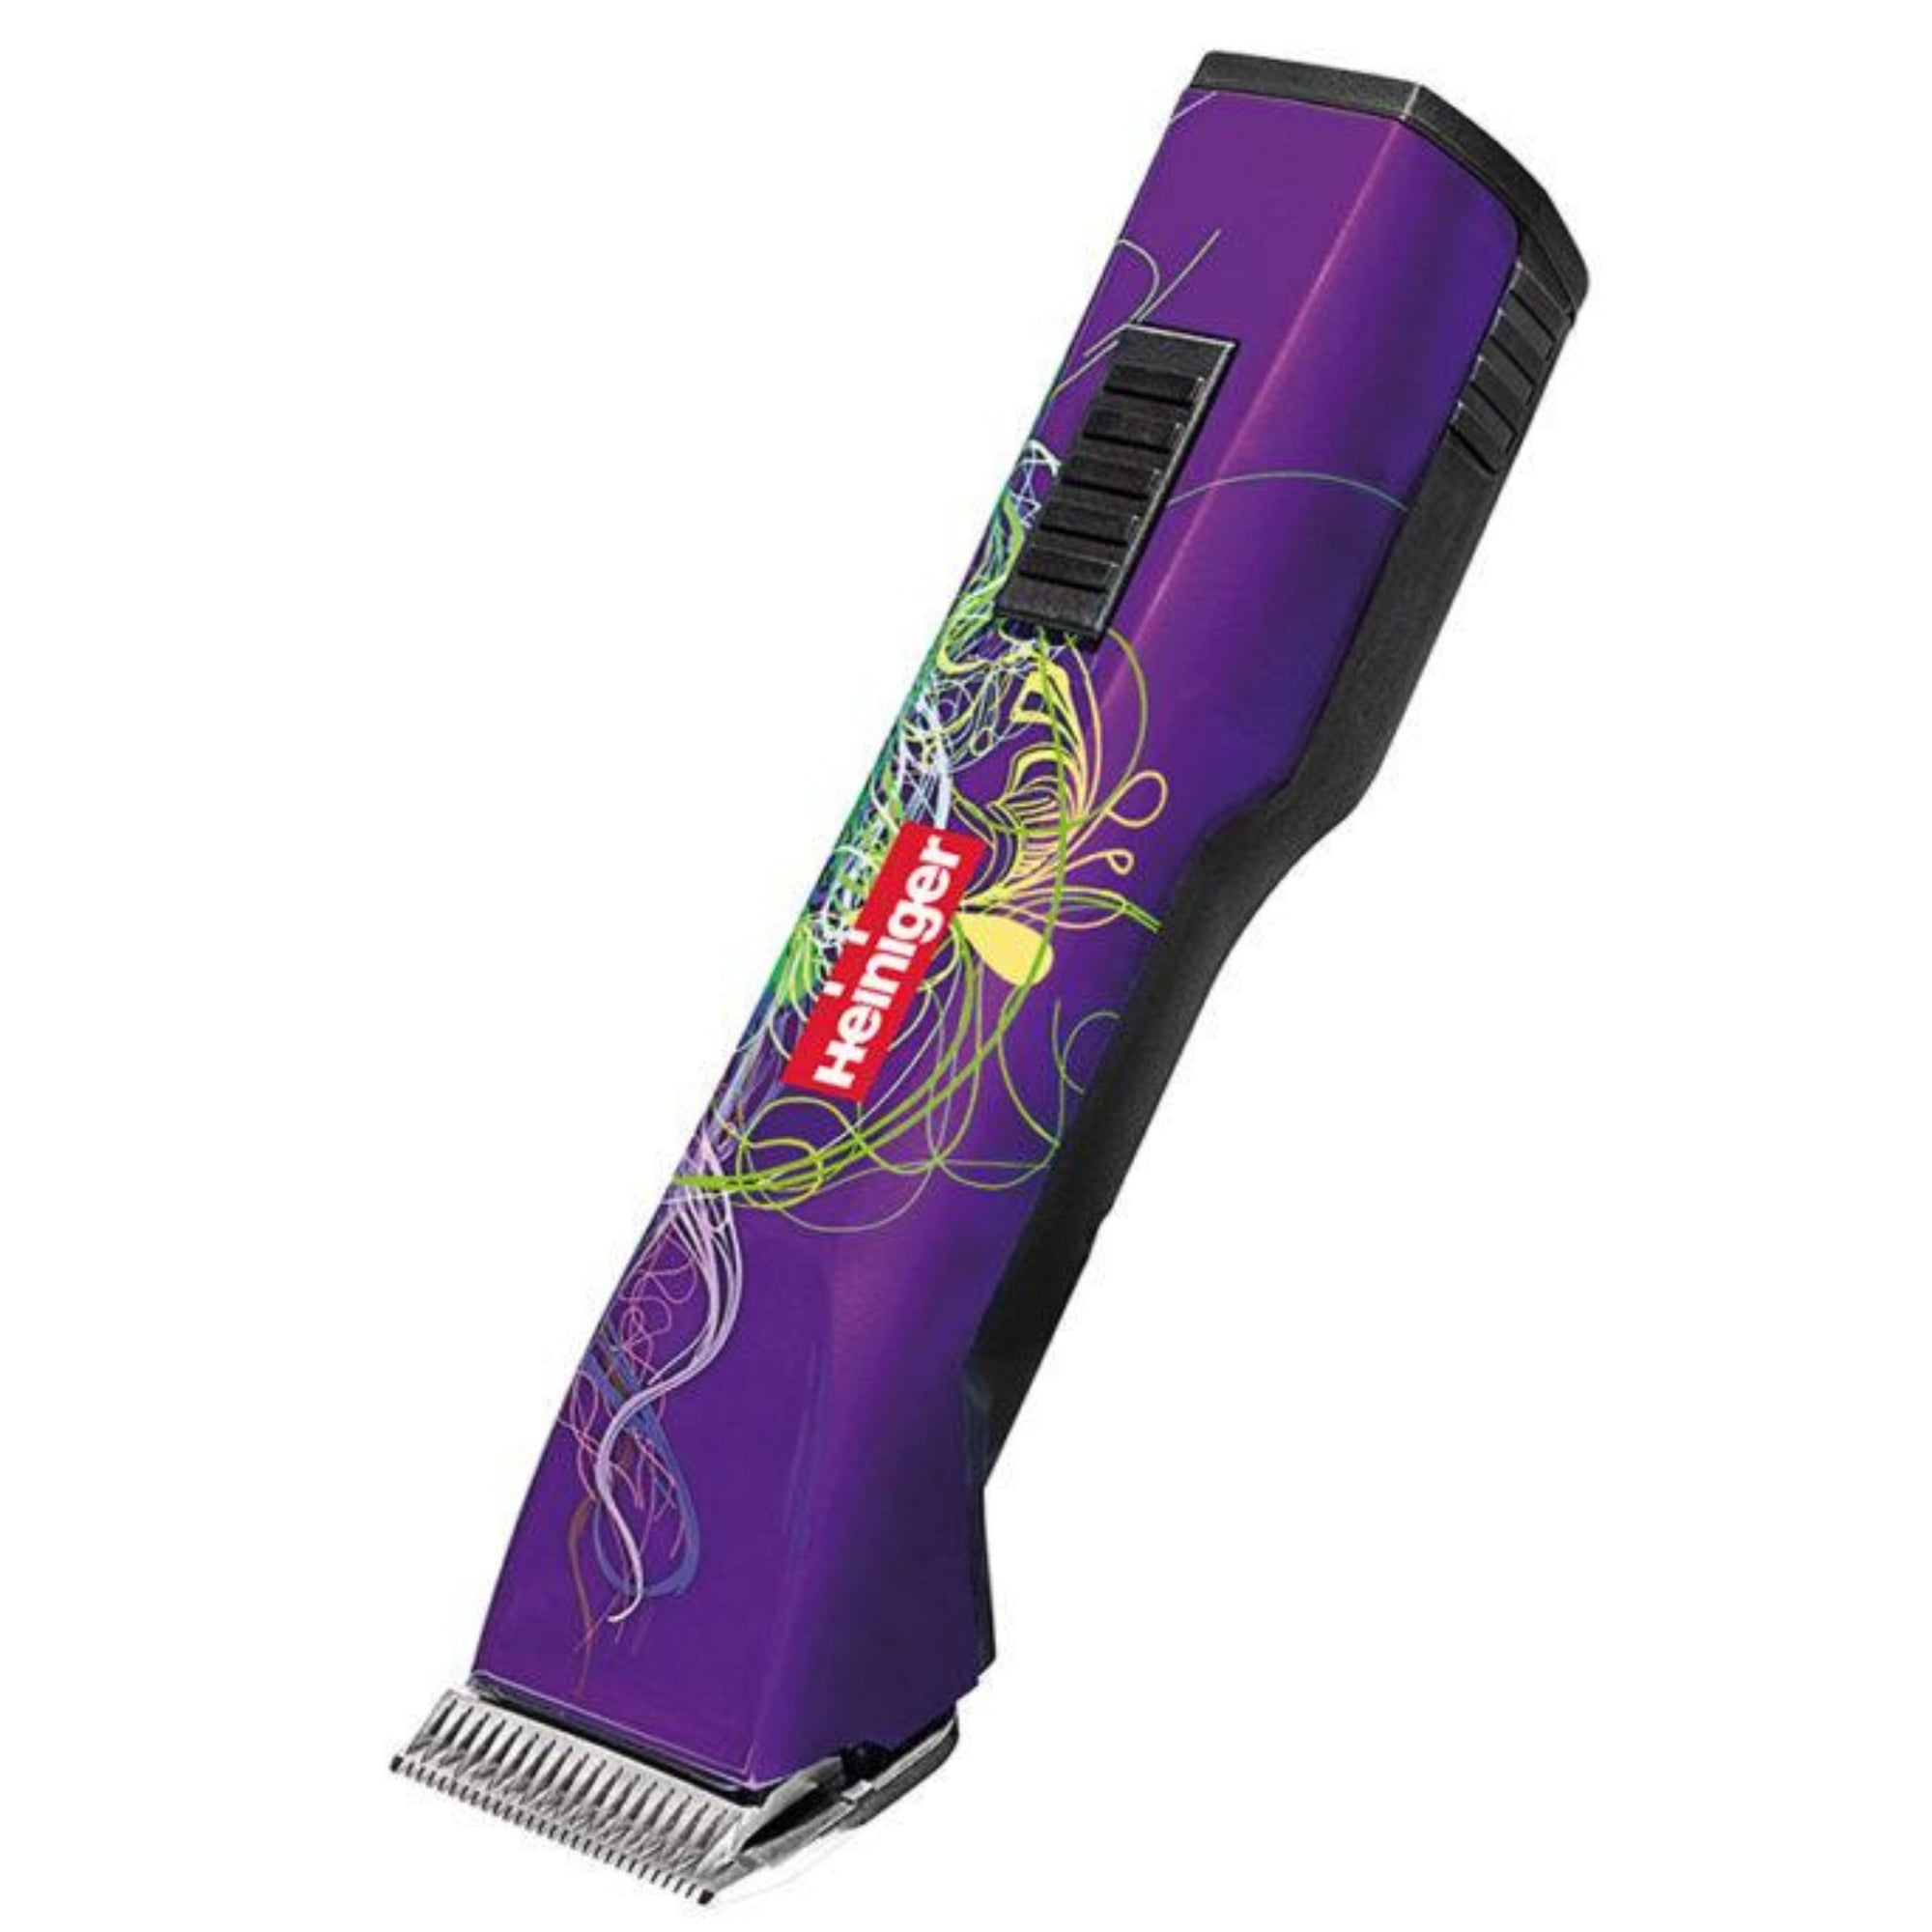 Purple horse clippers with red logo and colourful line design.